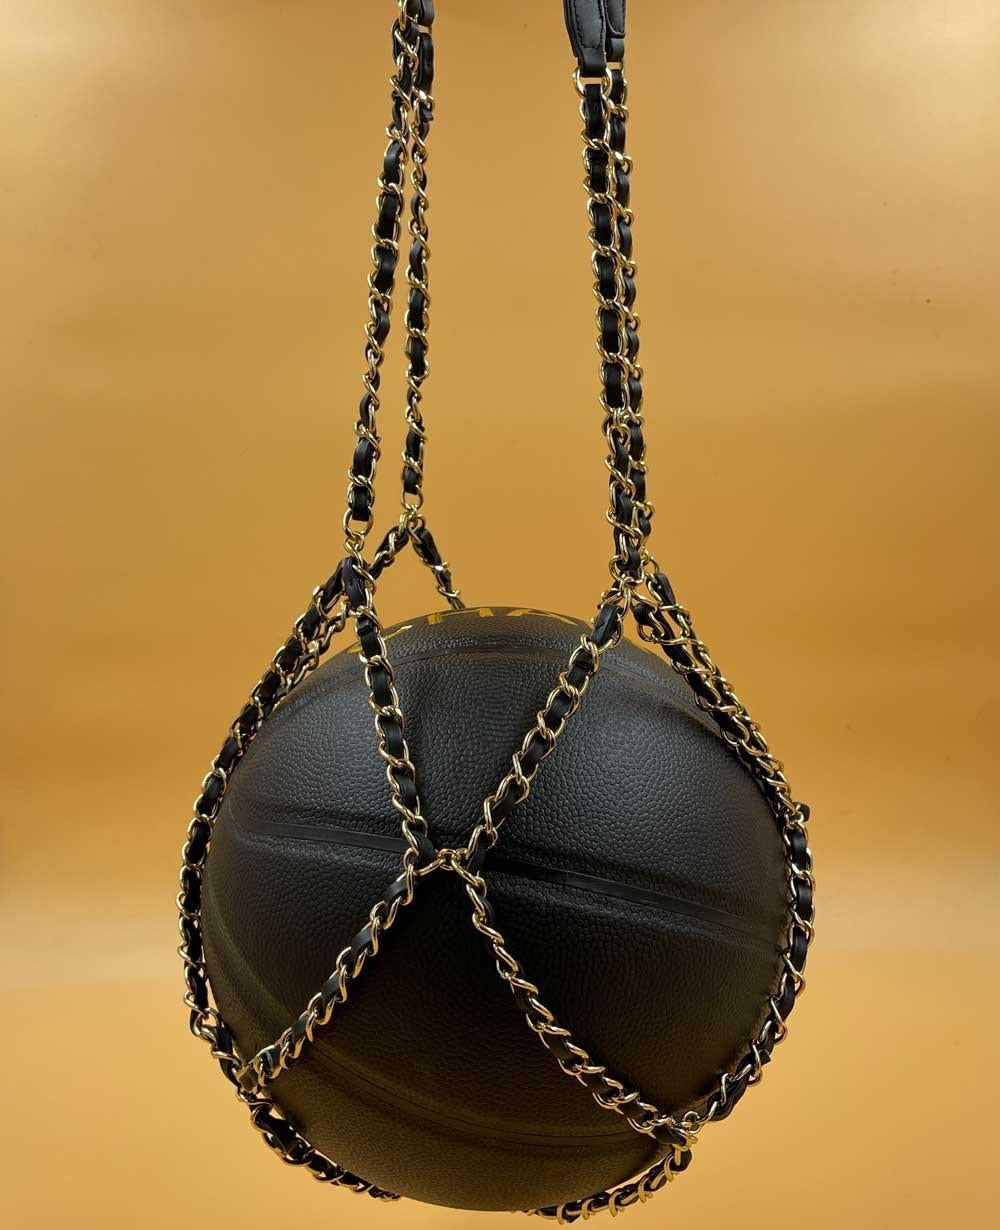 Women's or Men's CHANEL Black BasketBall with its Chain in Leather and Metal